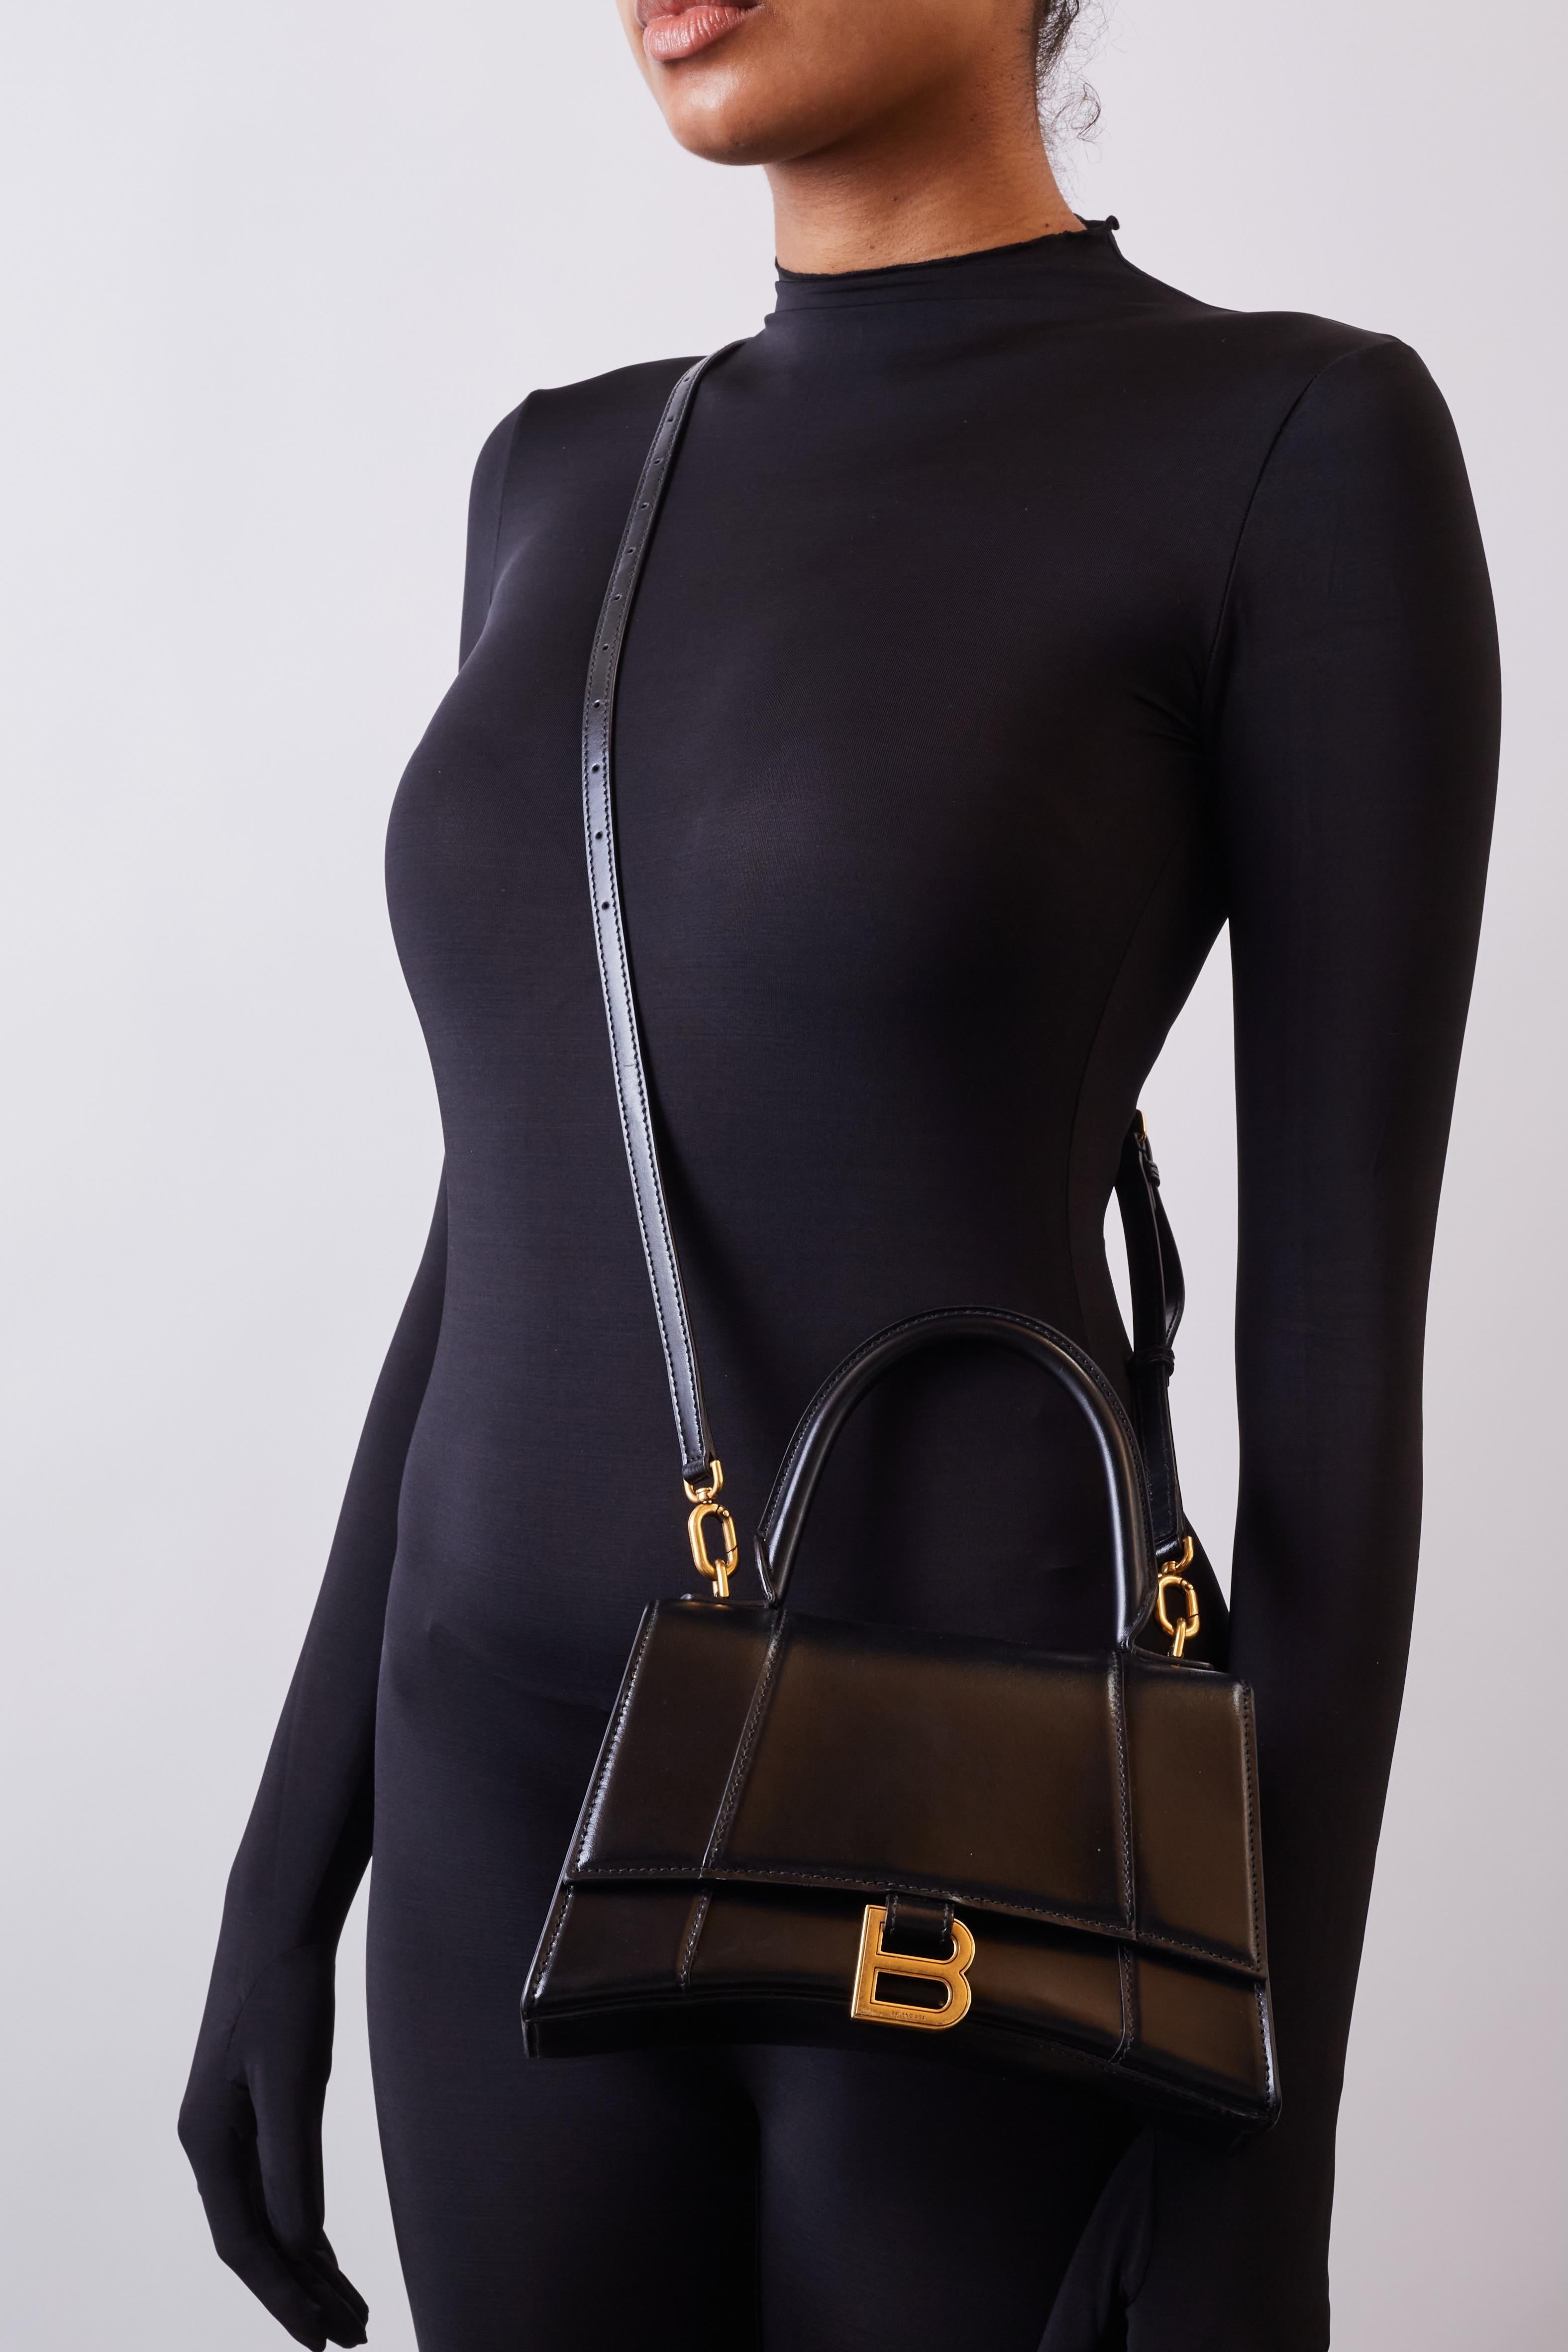 This petite handbag is made of smooth calfskin leather in black. The bag features a rolled leather top handle, the signature Balenciaga B charm at snap closure, gold hardware, and slip pocket at the back. The front flap opens to a black leather